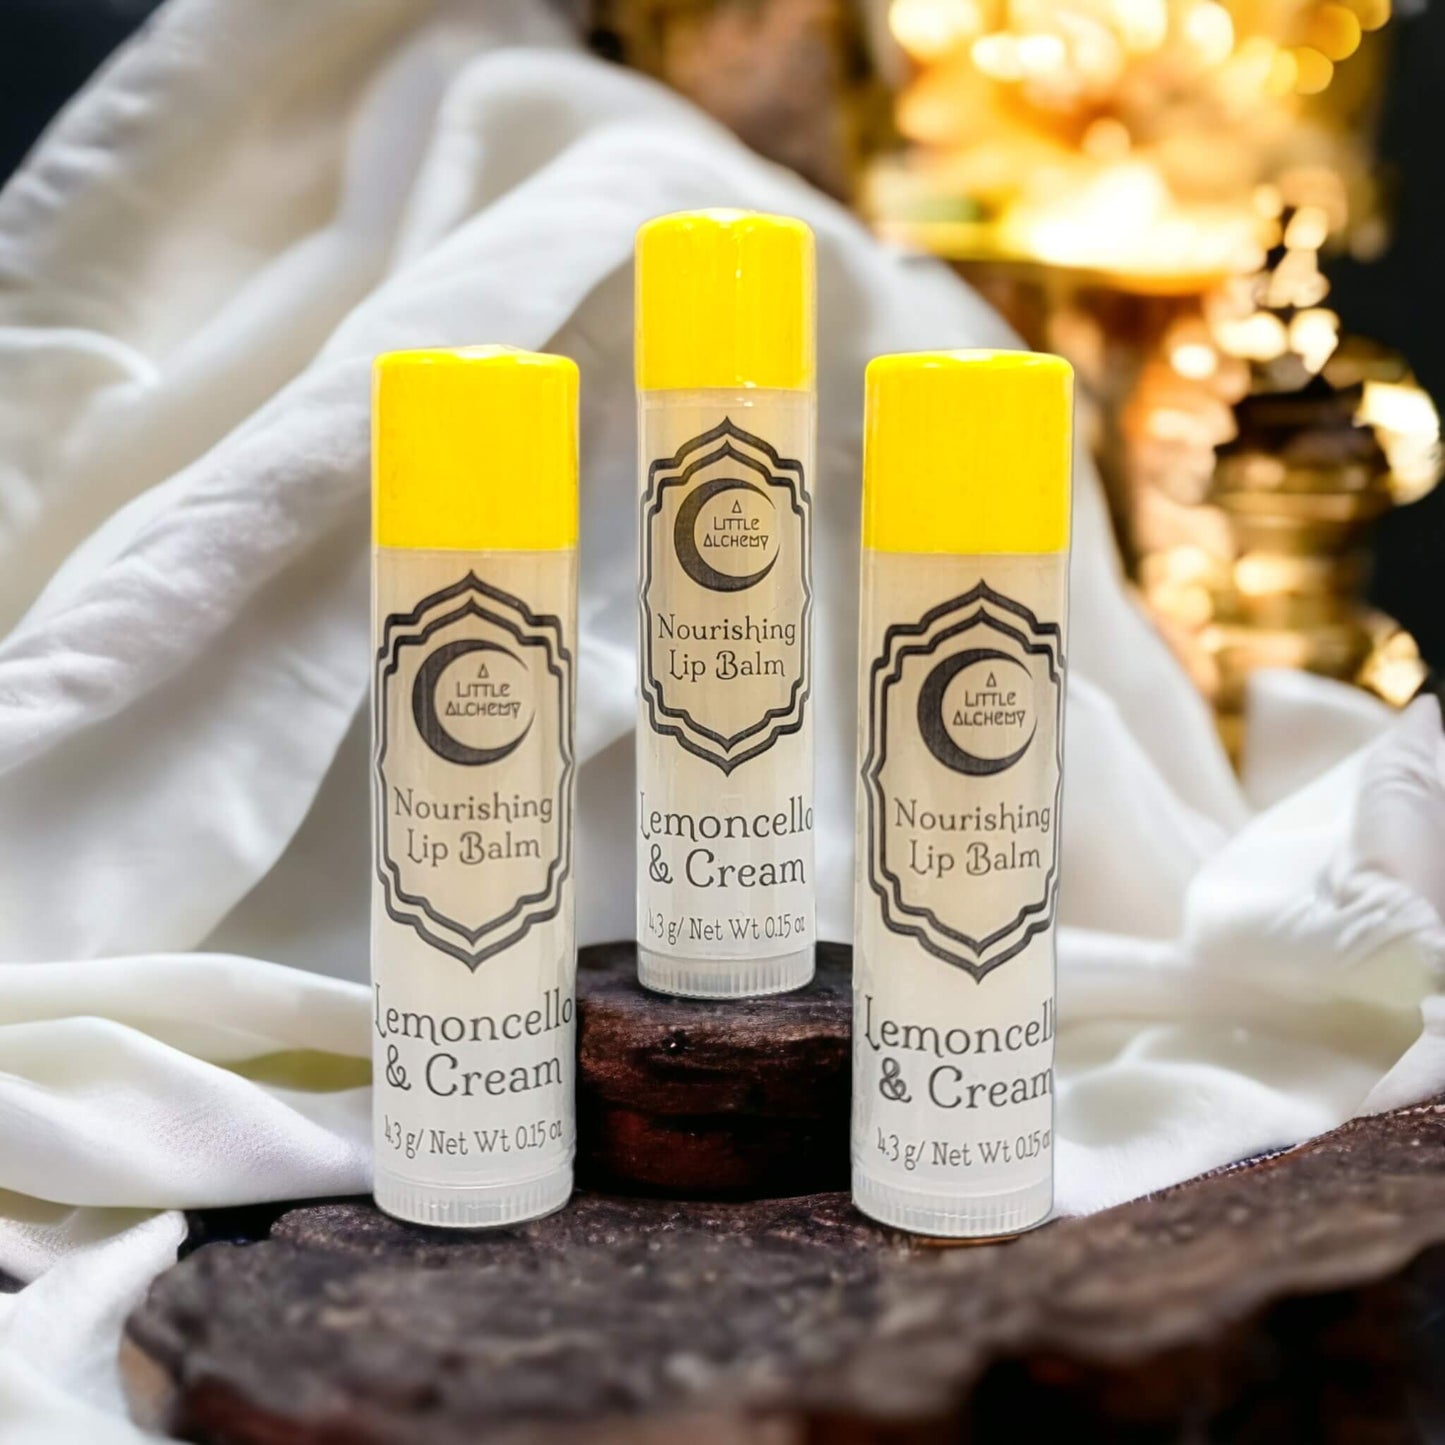 our nourishing lip balms in the flavor lemoncello and cream.